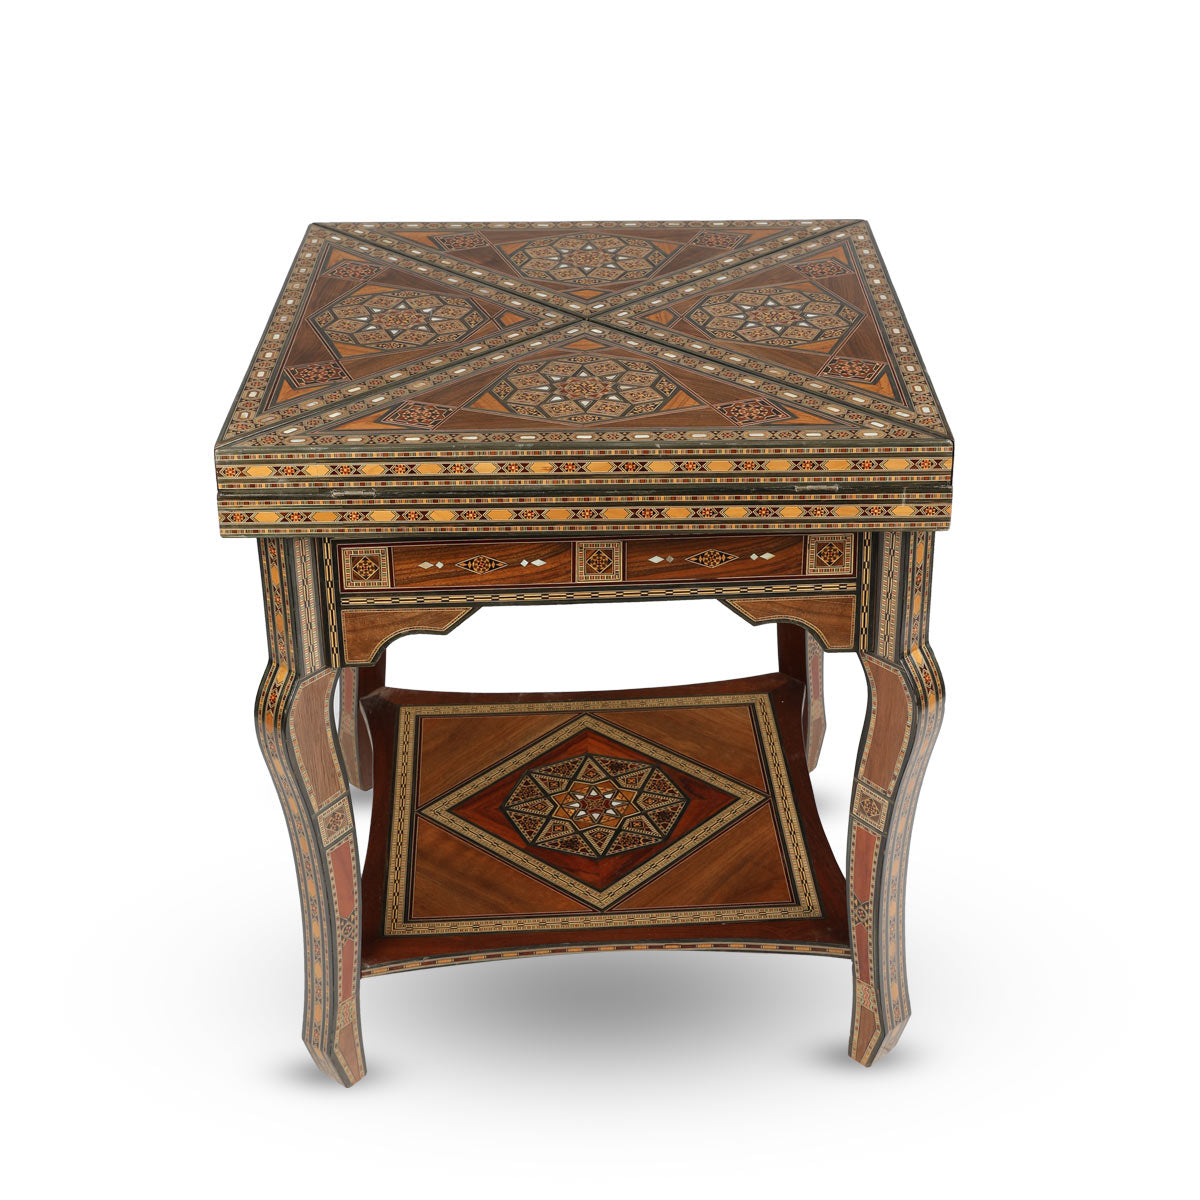 Side View of Syrian Mosaic Patterned Marquetry Inlaid Wooden Playing Table